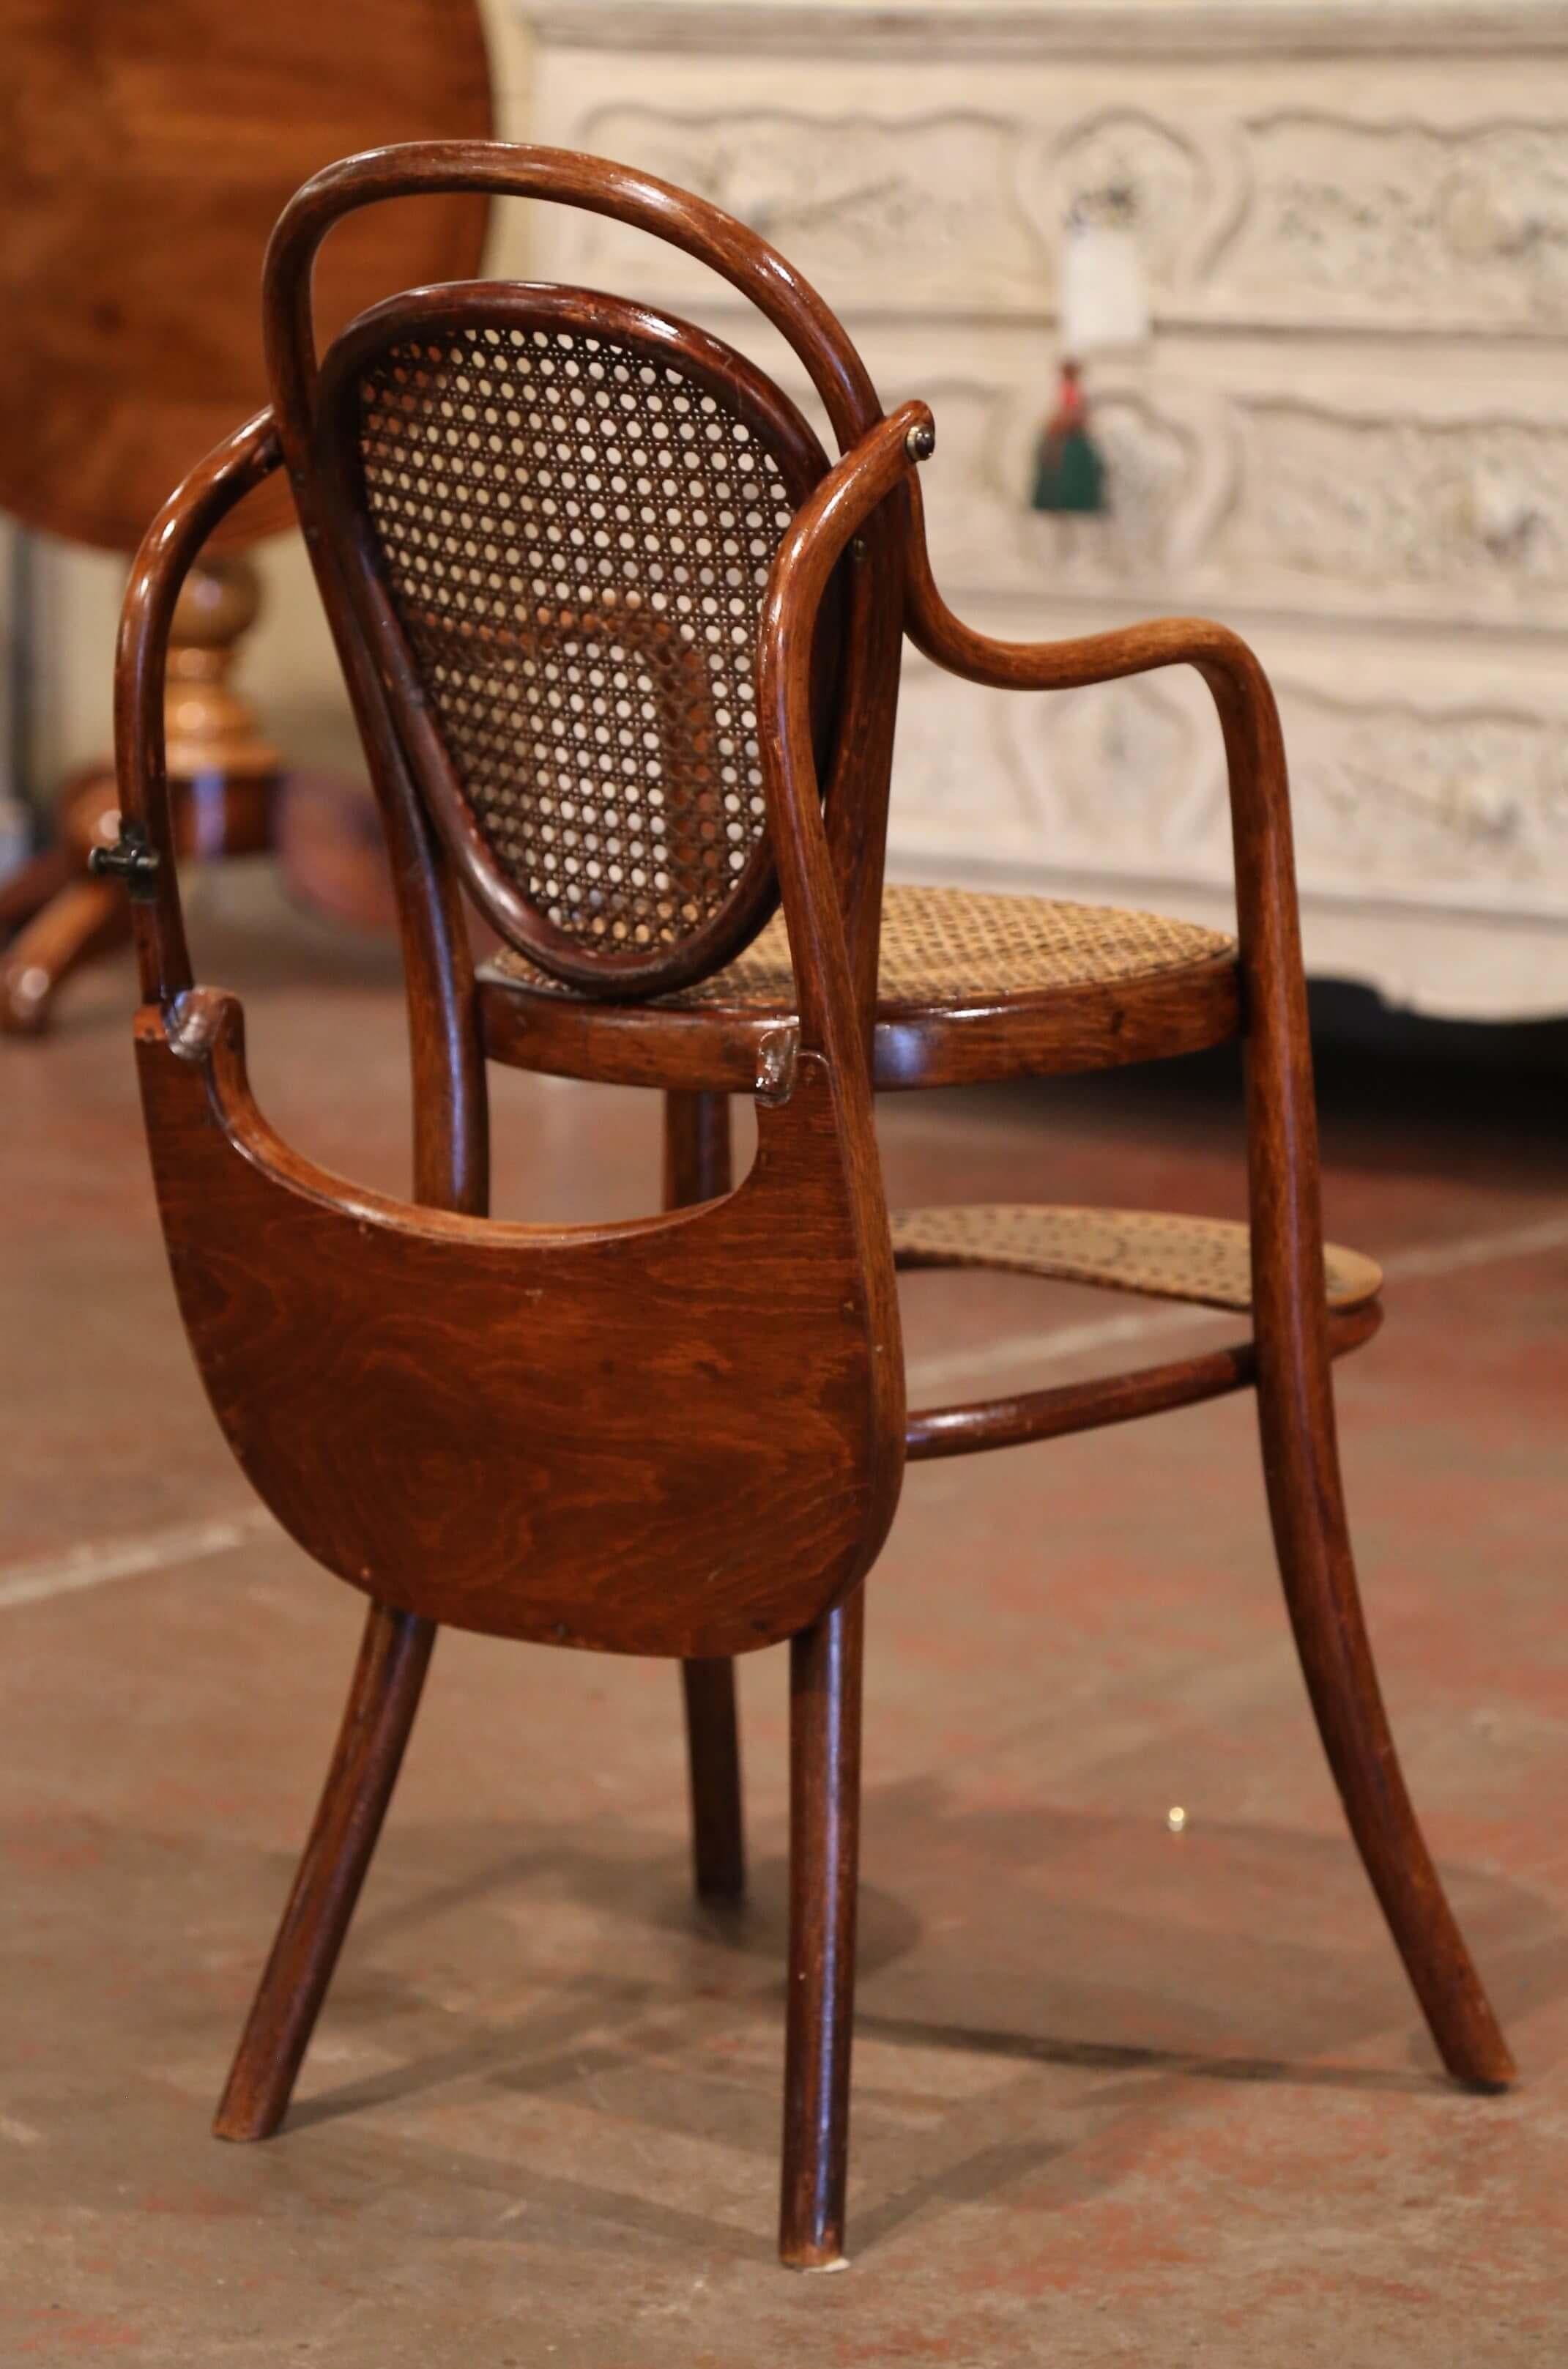 Early 20th Century French Bentwood and Cane High Baby Chair by M. Thonet For Sale 6